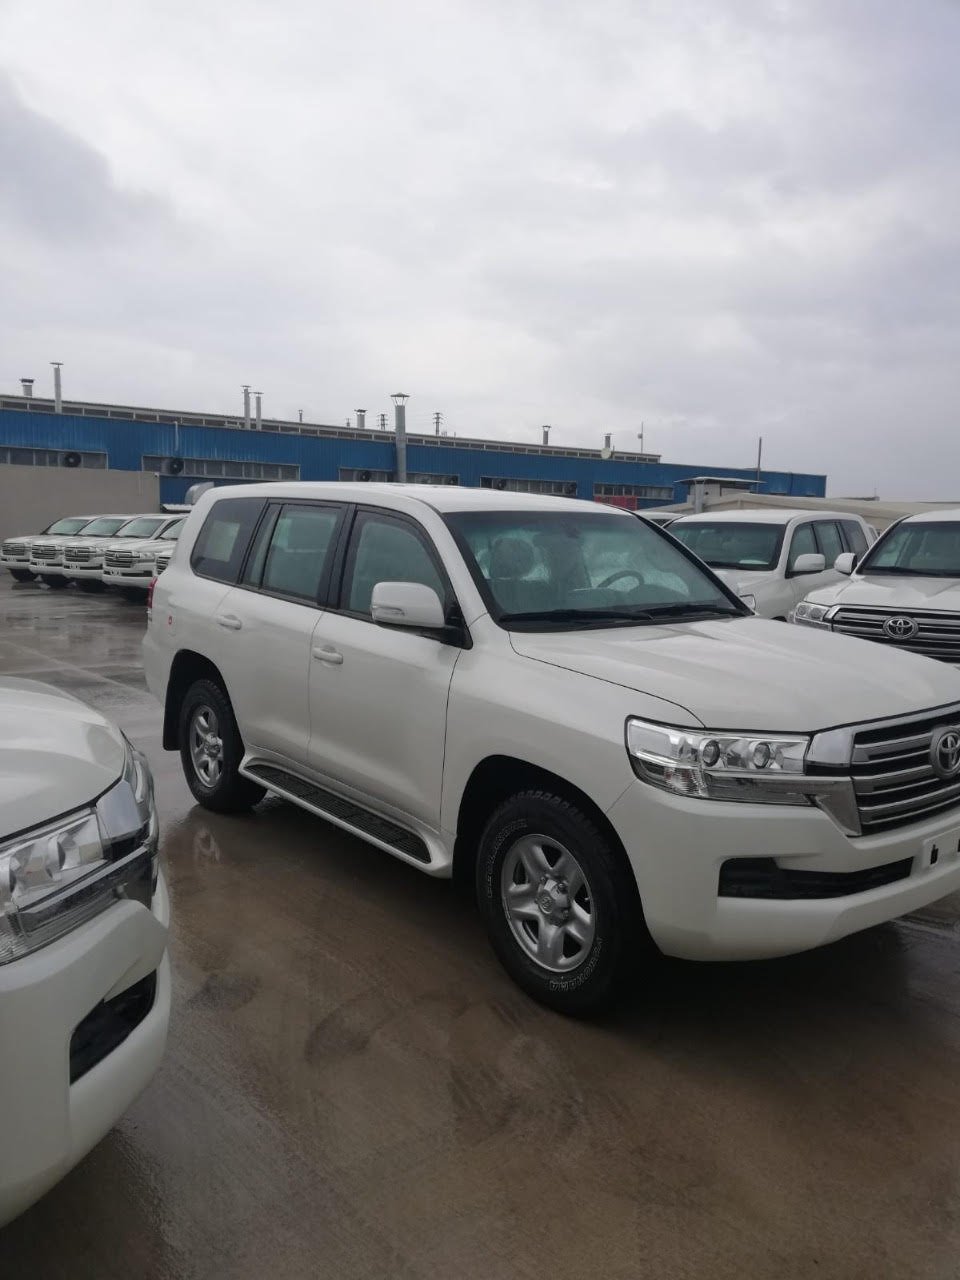 Offer - Now Only 4 ? 2020 Toyota Land Cruisers - B6 Armoured - LHD